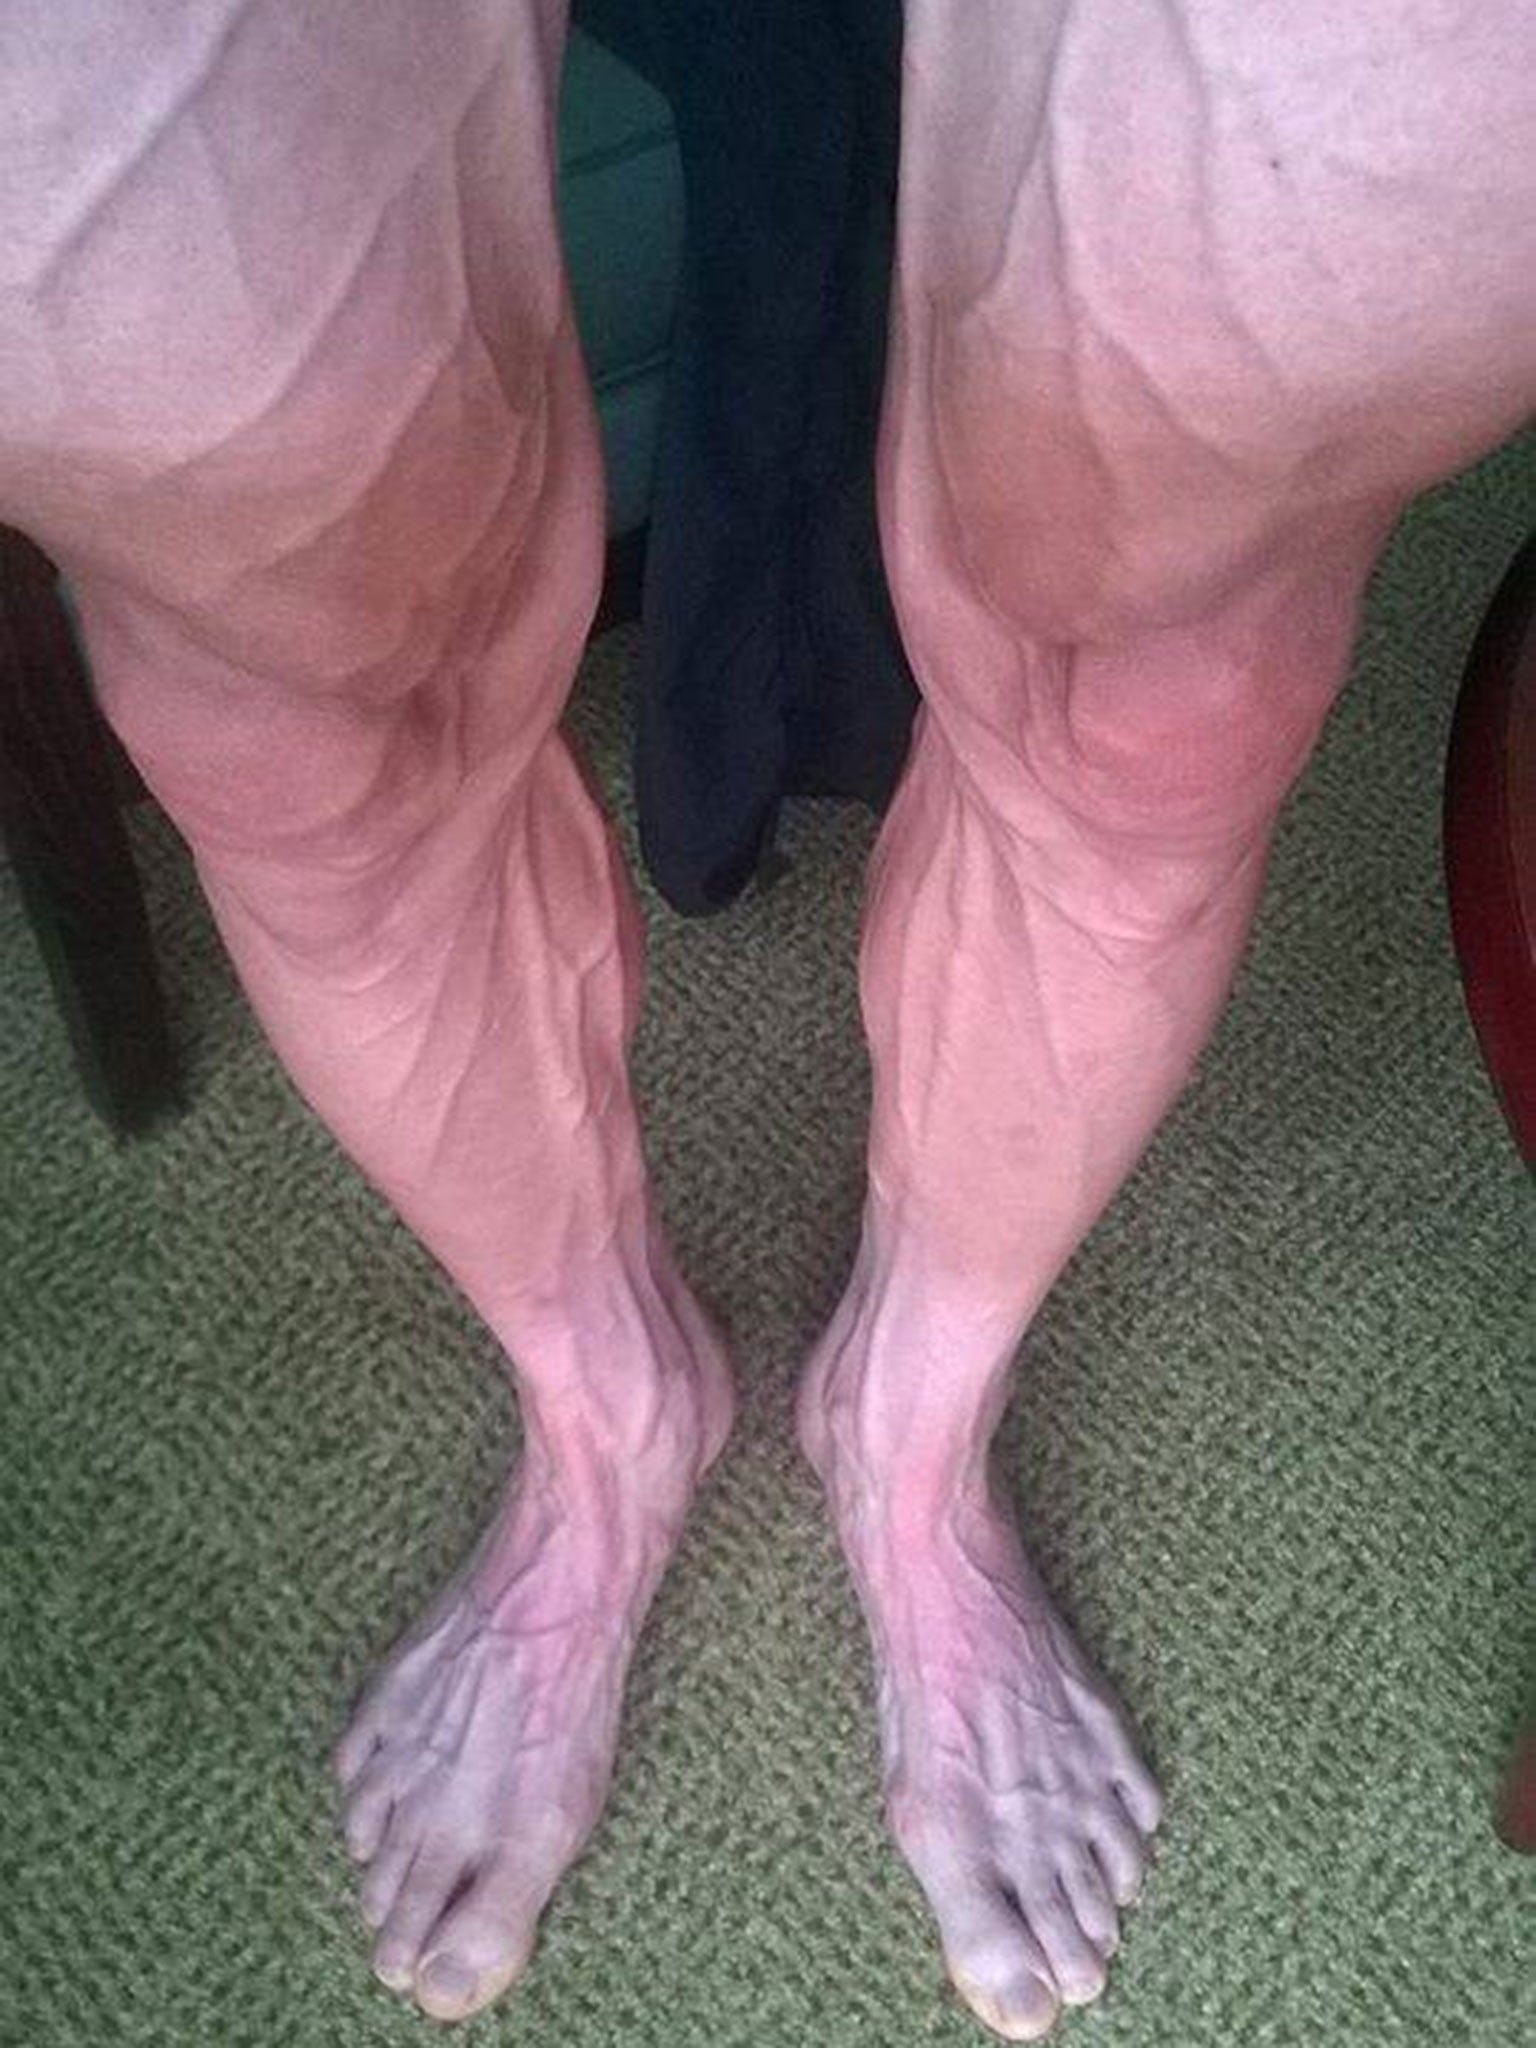 Tour de France competitor Bartosz Huzarski’s legs have highlighted the gruelling nature of the race, after he posted a picture on Facebook showing extremely prominent veins stretching from his feet and all the way up his legs.